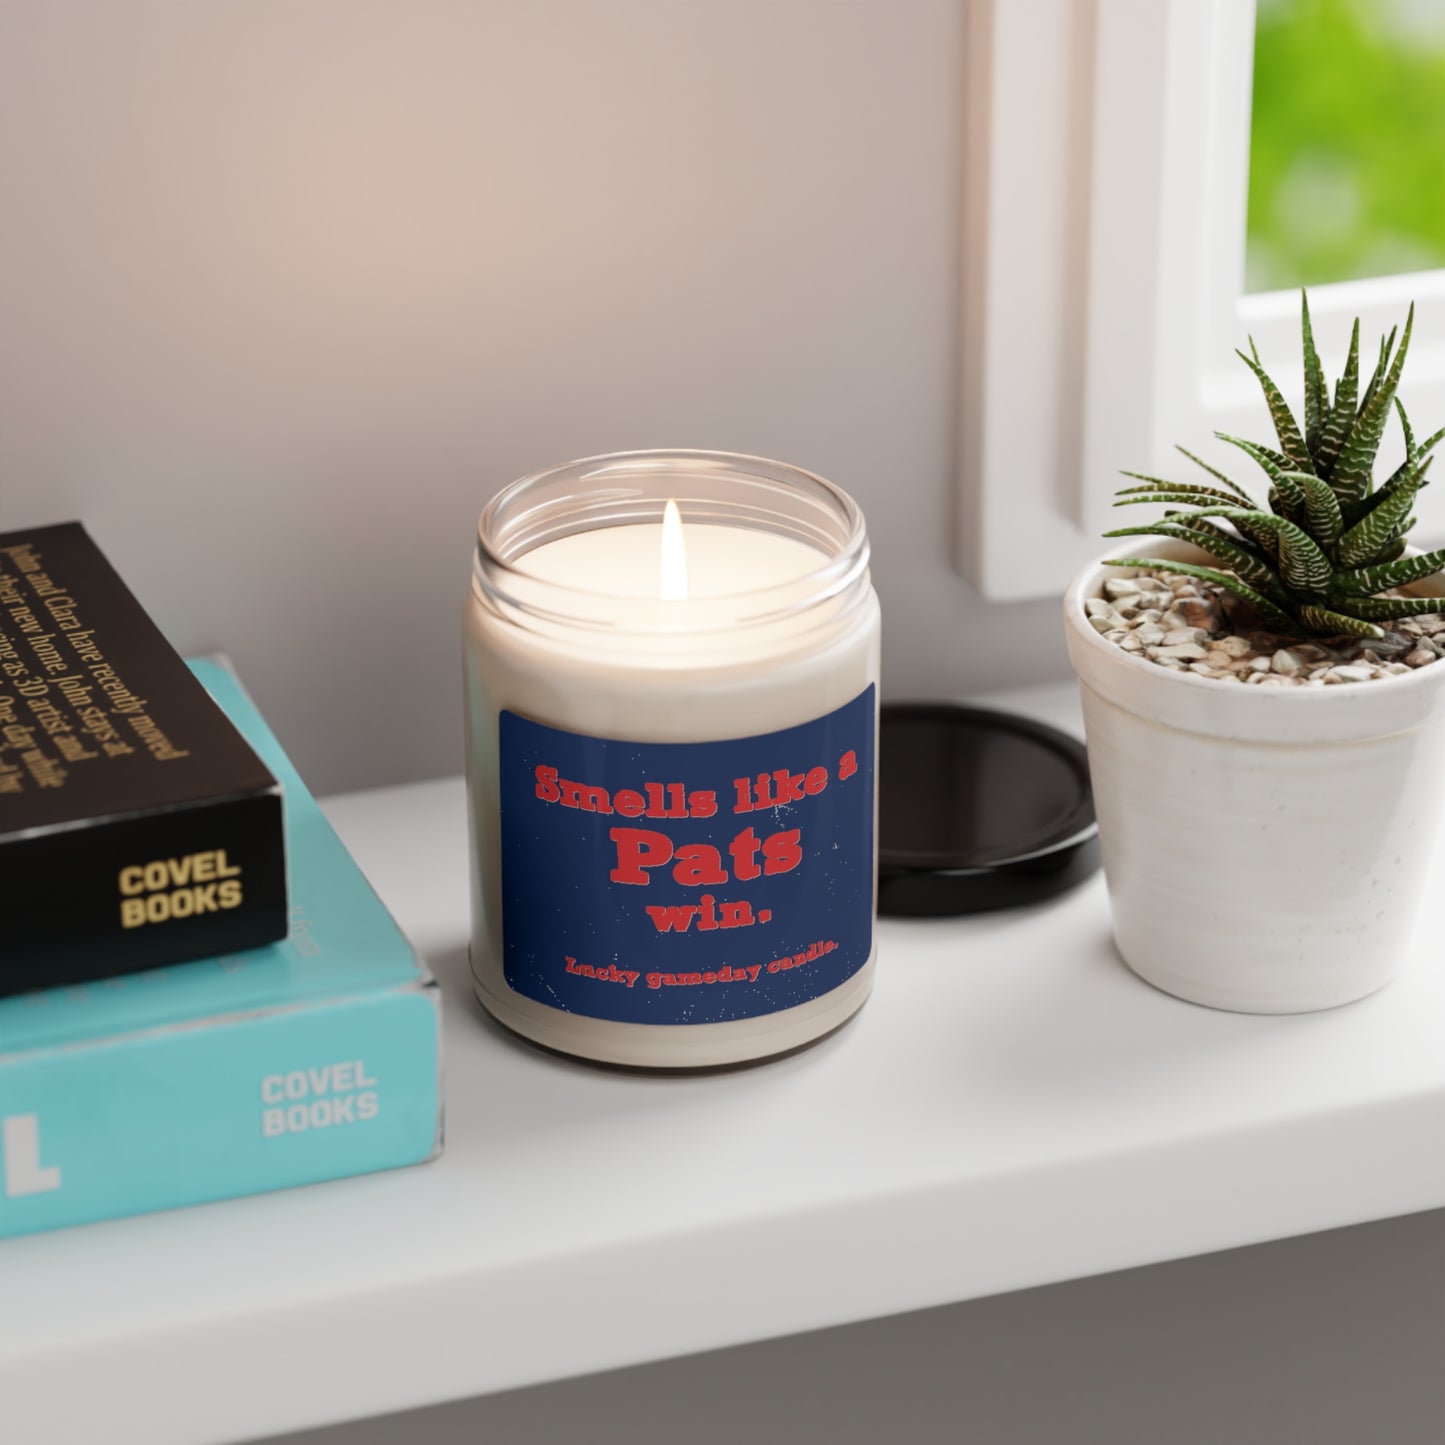 New England Football - "Smells Like a Pats Win" Scented Candle